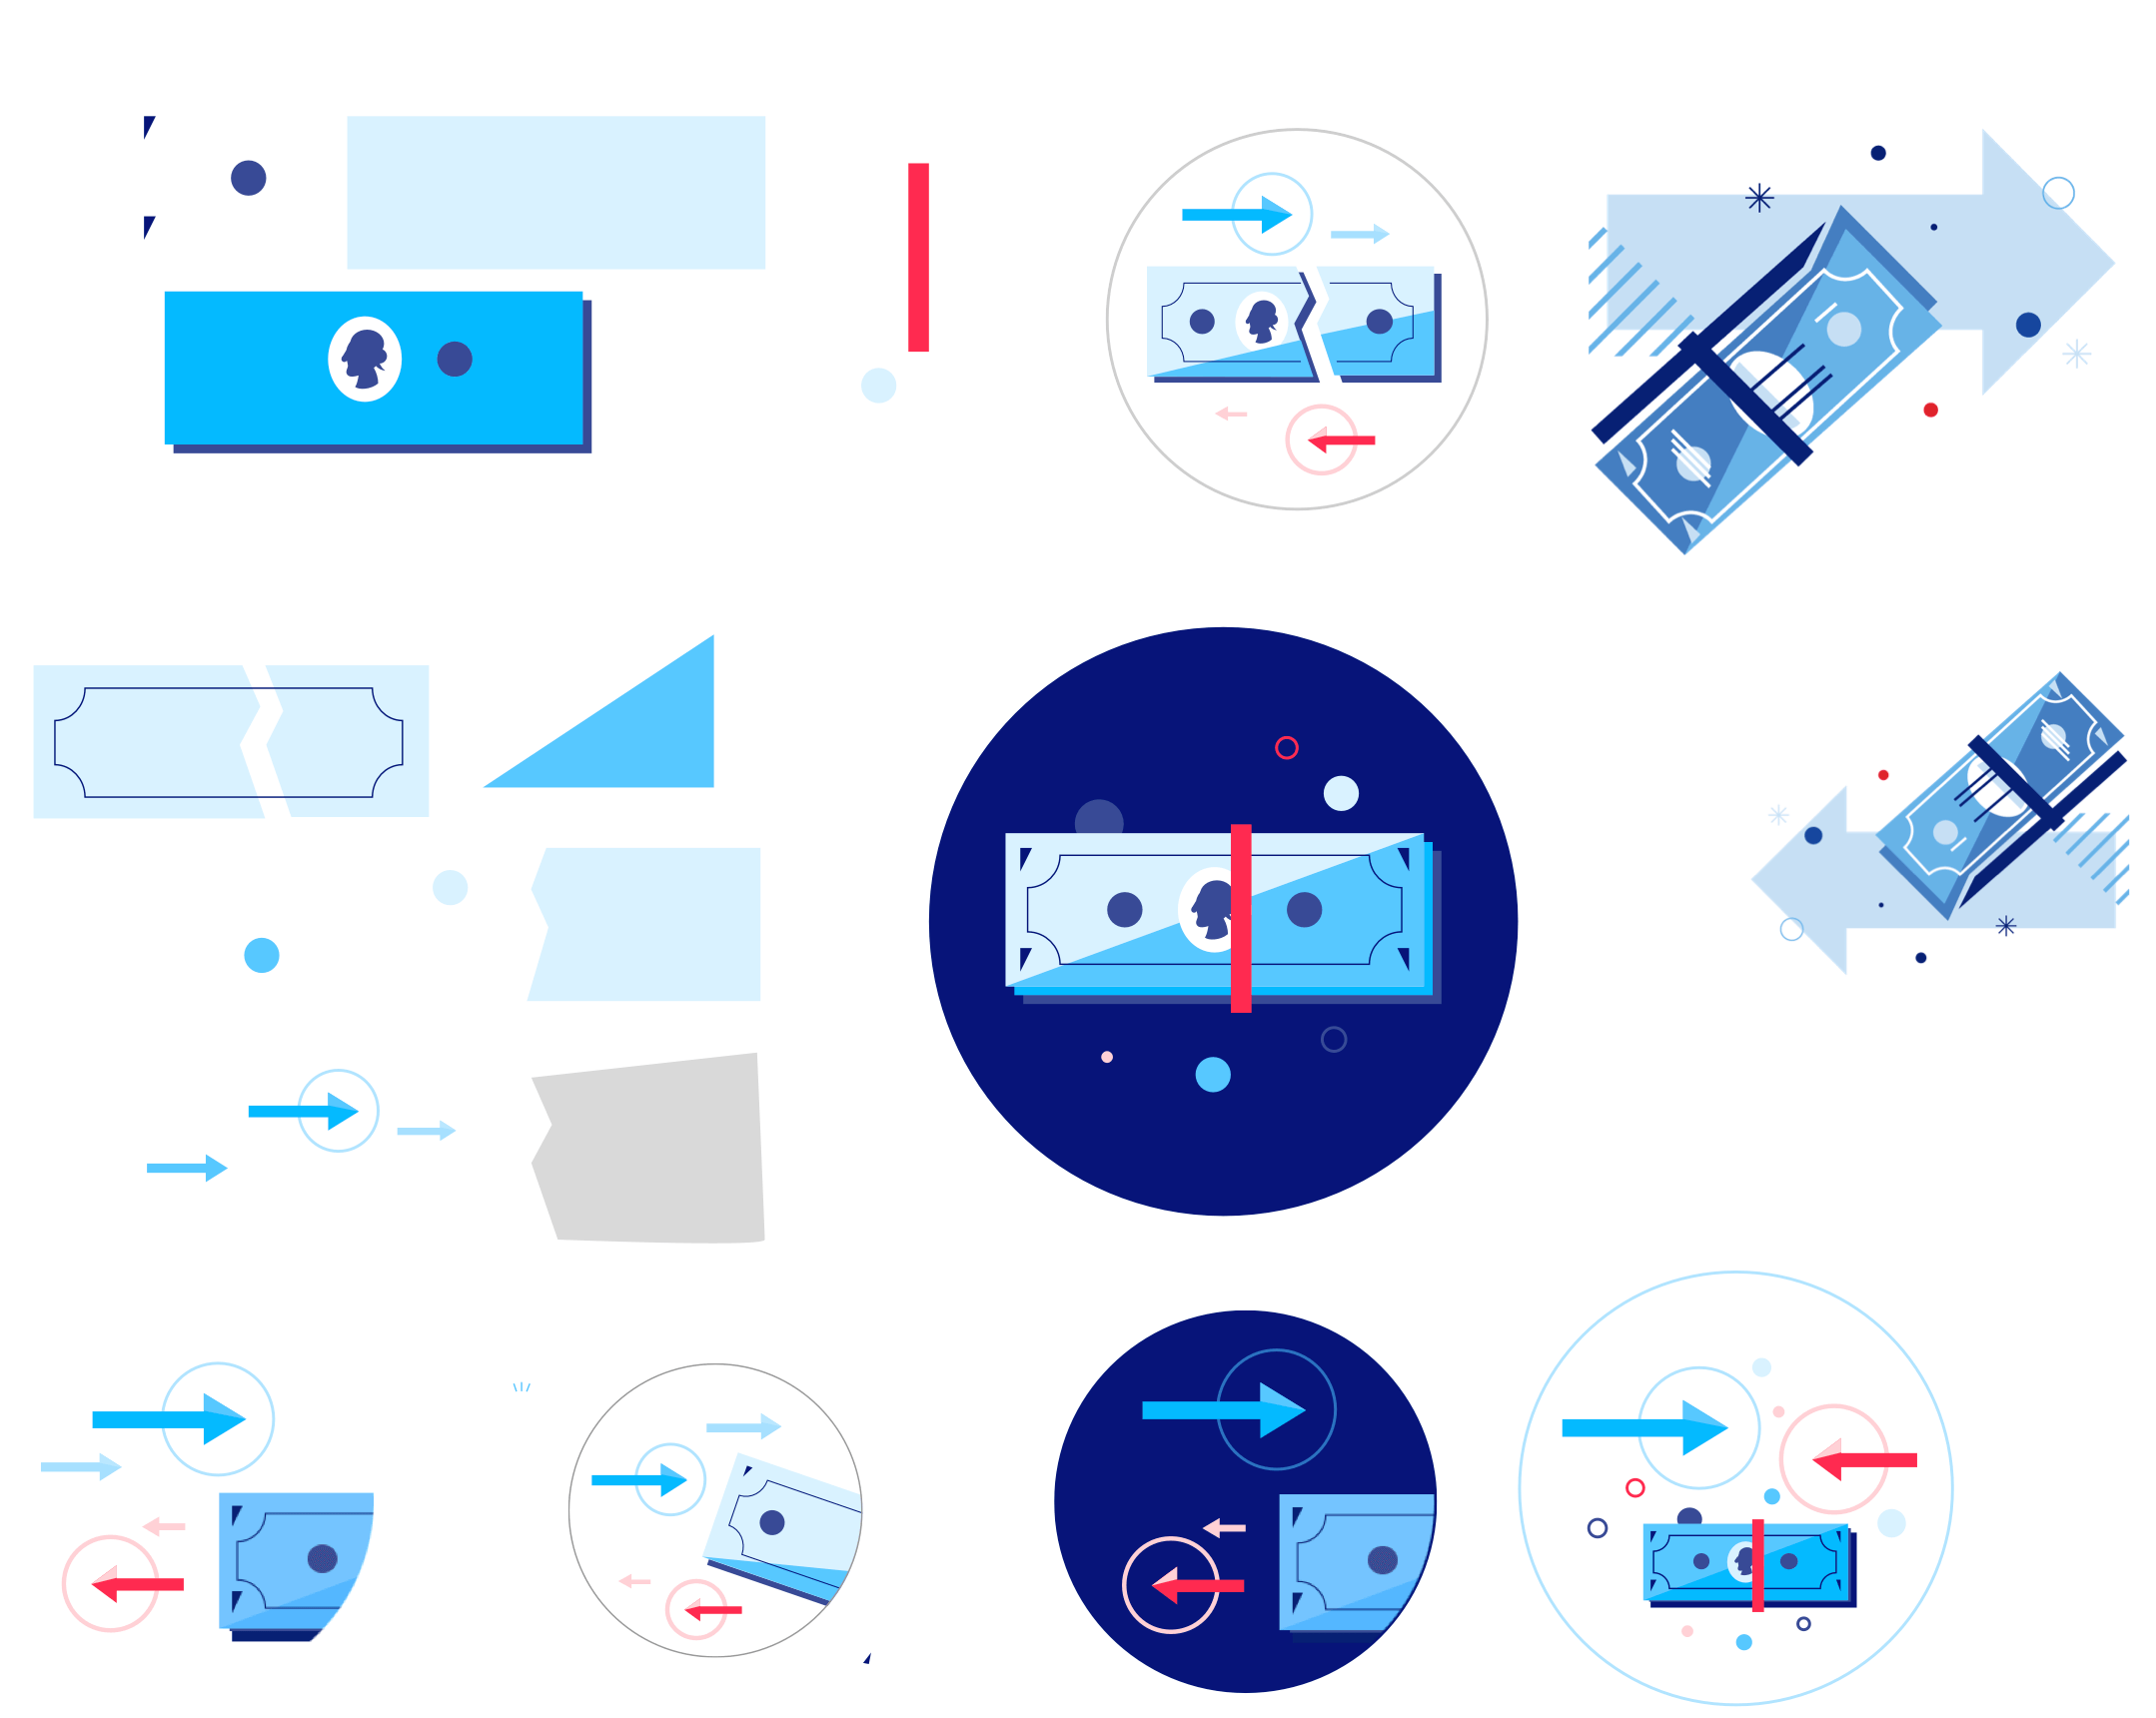 Designing New Illustrations in U.S. Bank Style